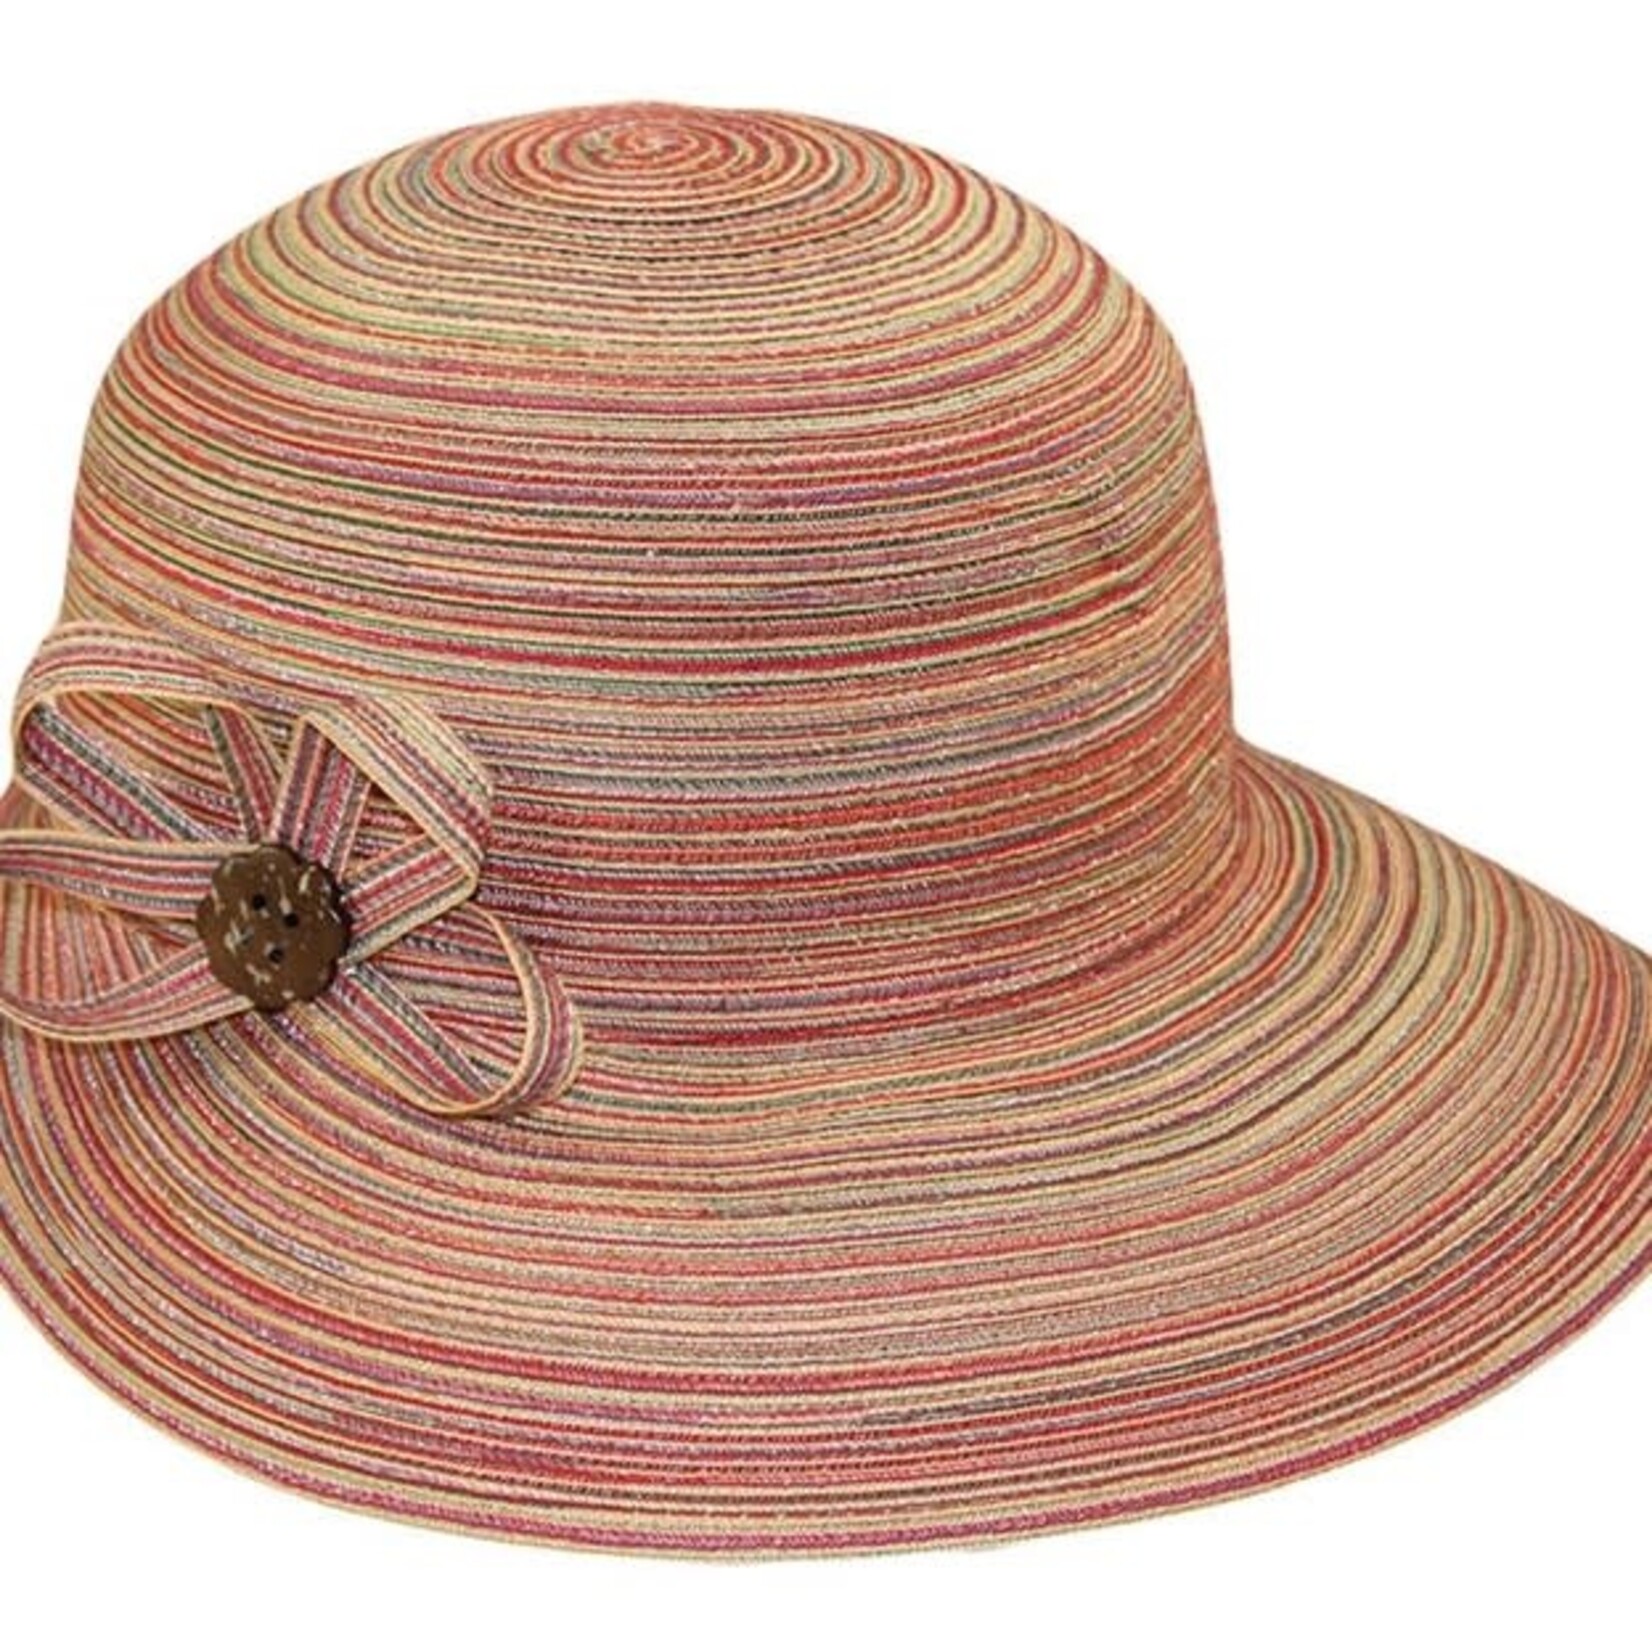 Jeanne Simmons Poly Braid Brim Cap in Sunset